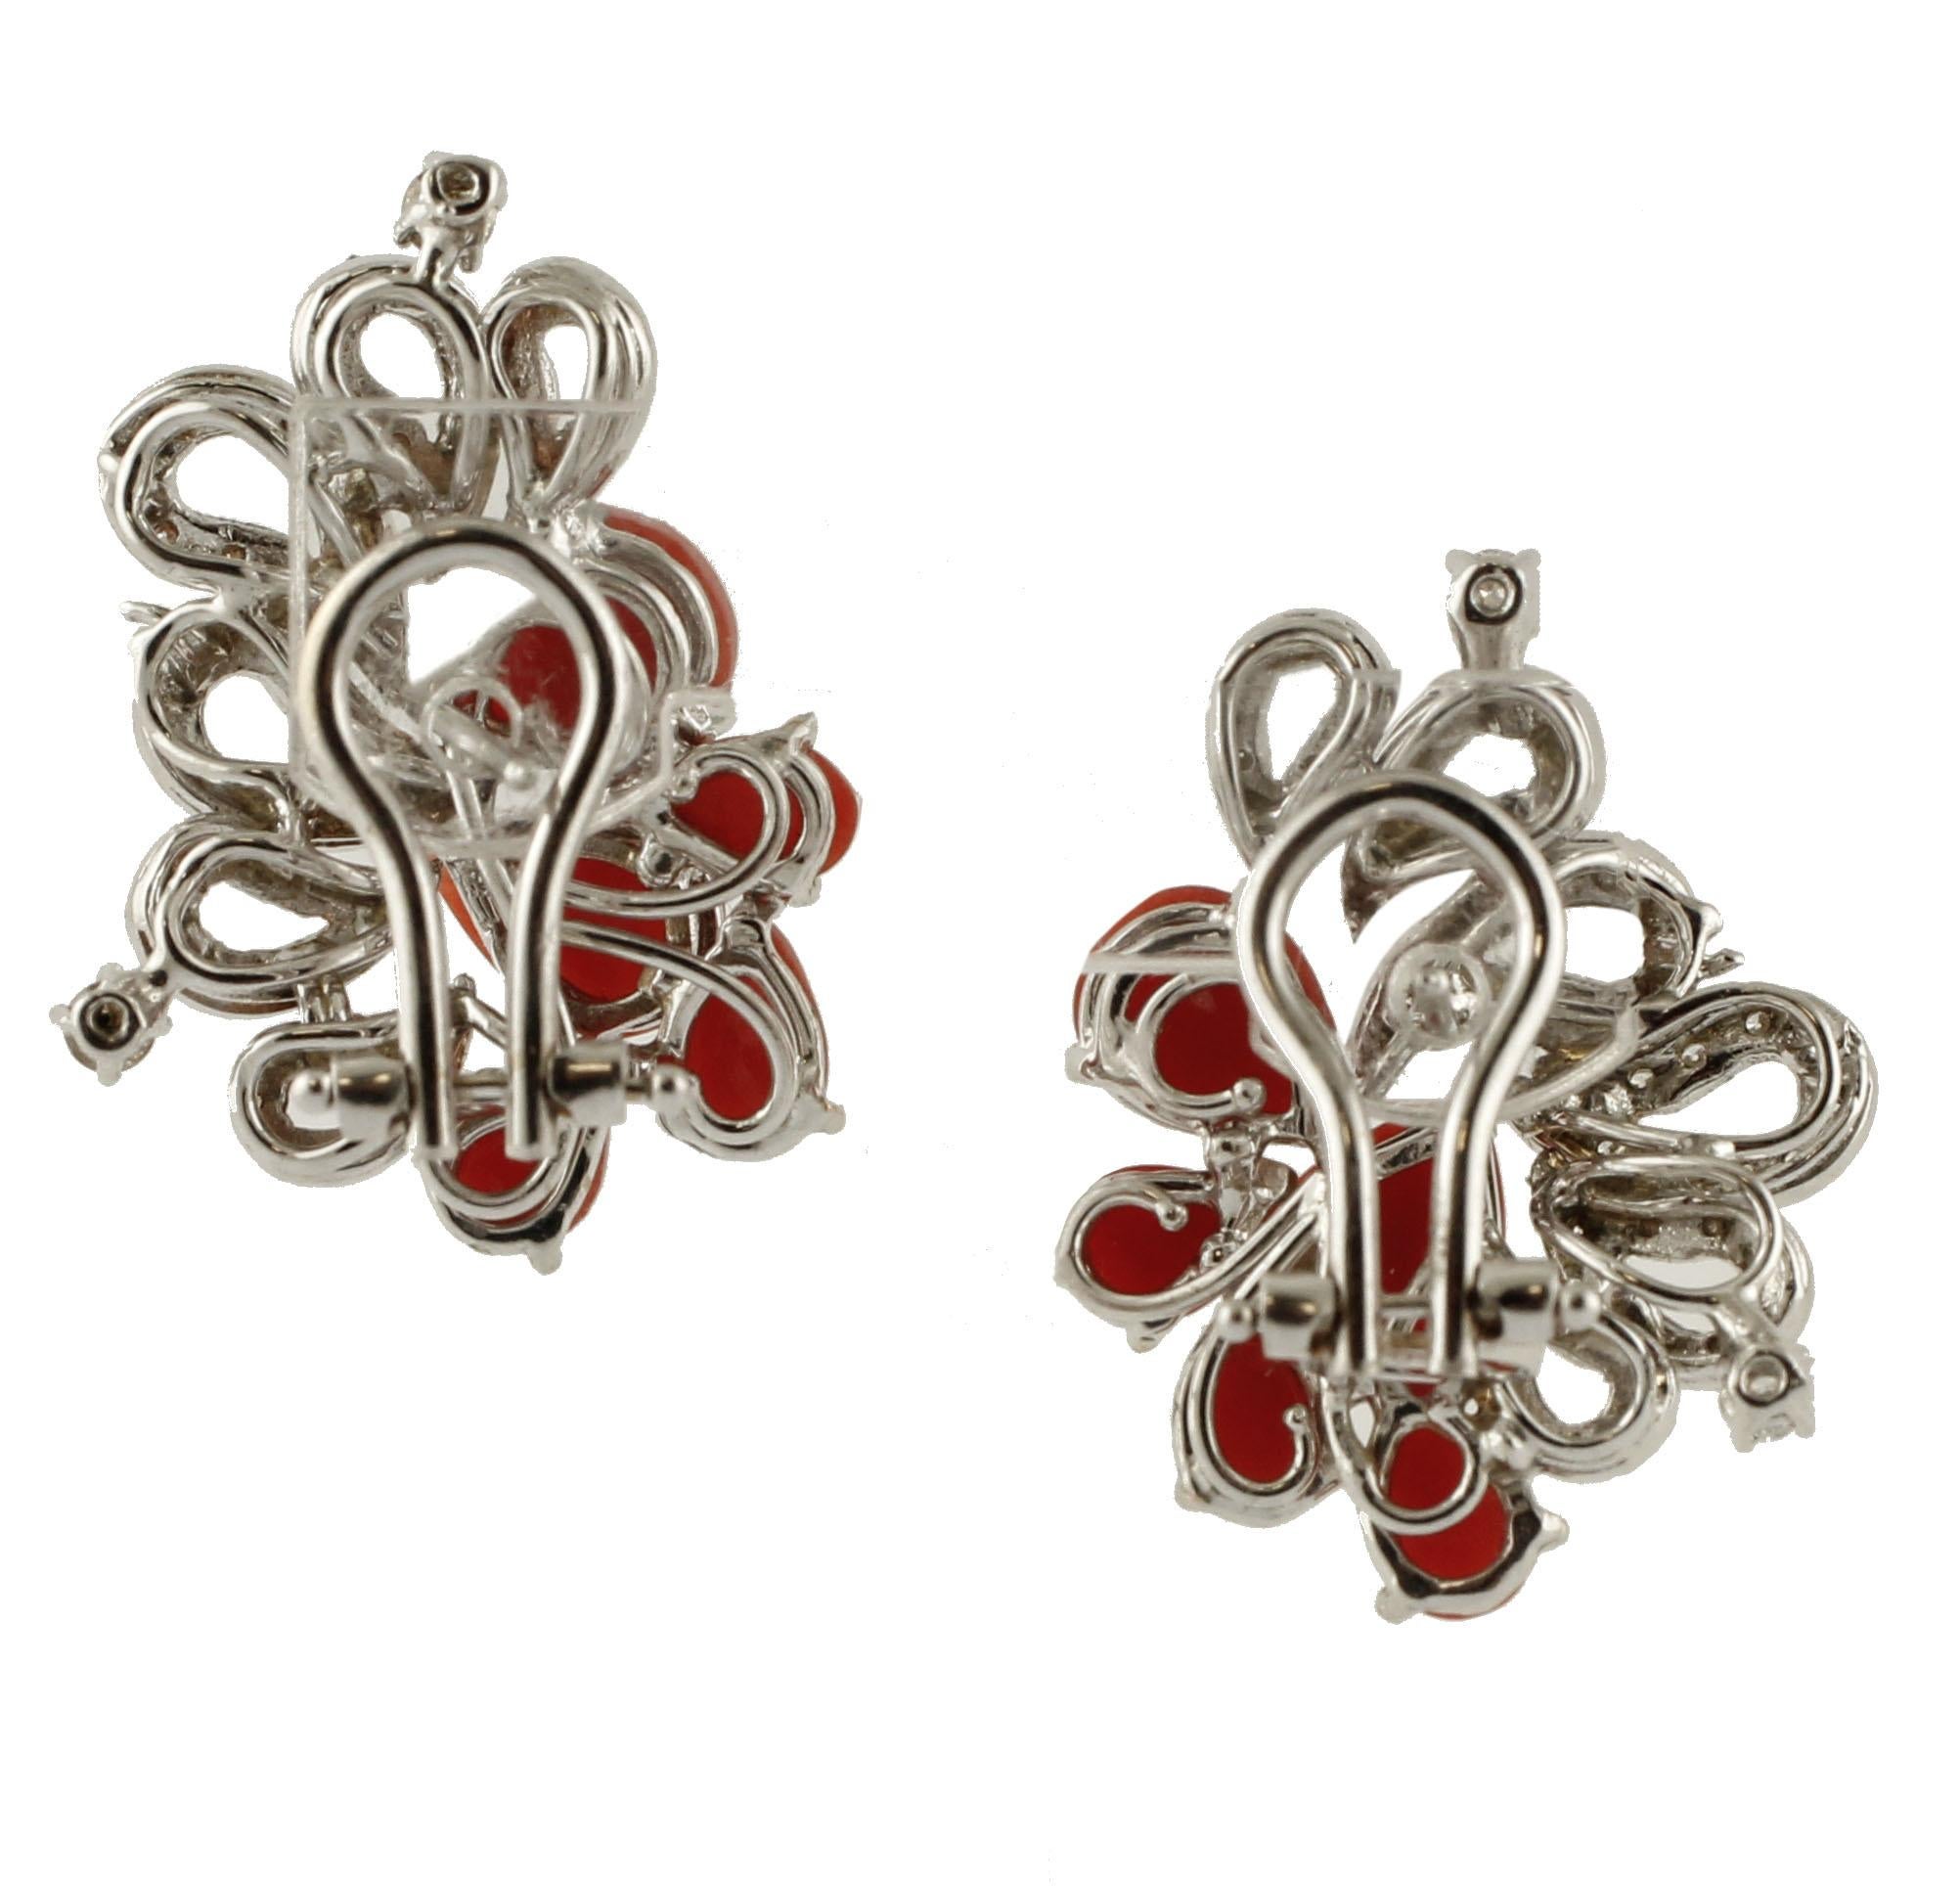 Very elegant and refined earrings realized in 14 kt white gold structure. The earrings are mounted with 5 small drop-shaped red rubrum corals adorned by drop-shaped details in 14k white gold studded with diamonds. 
These earrings are totally